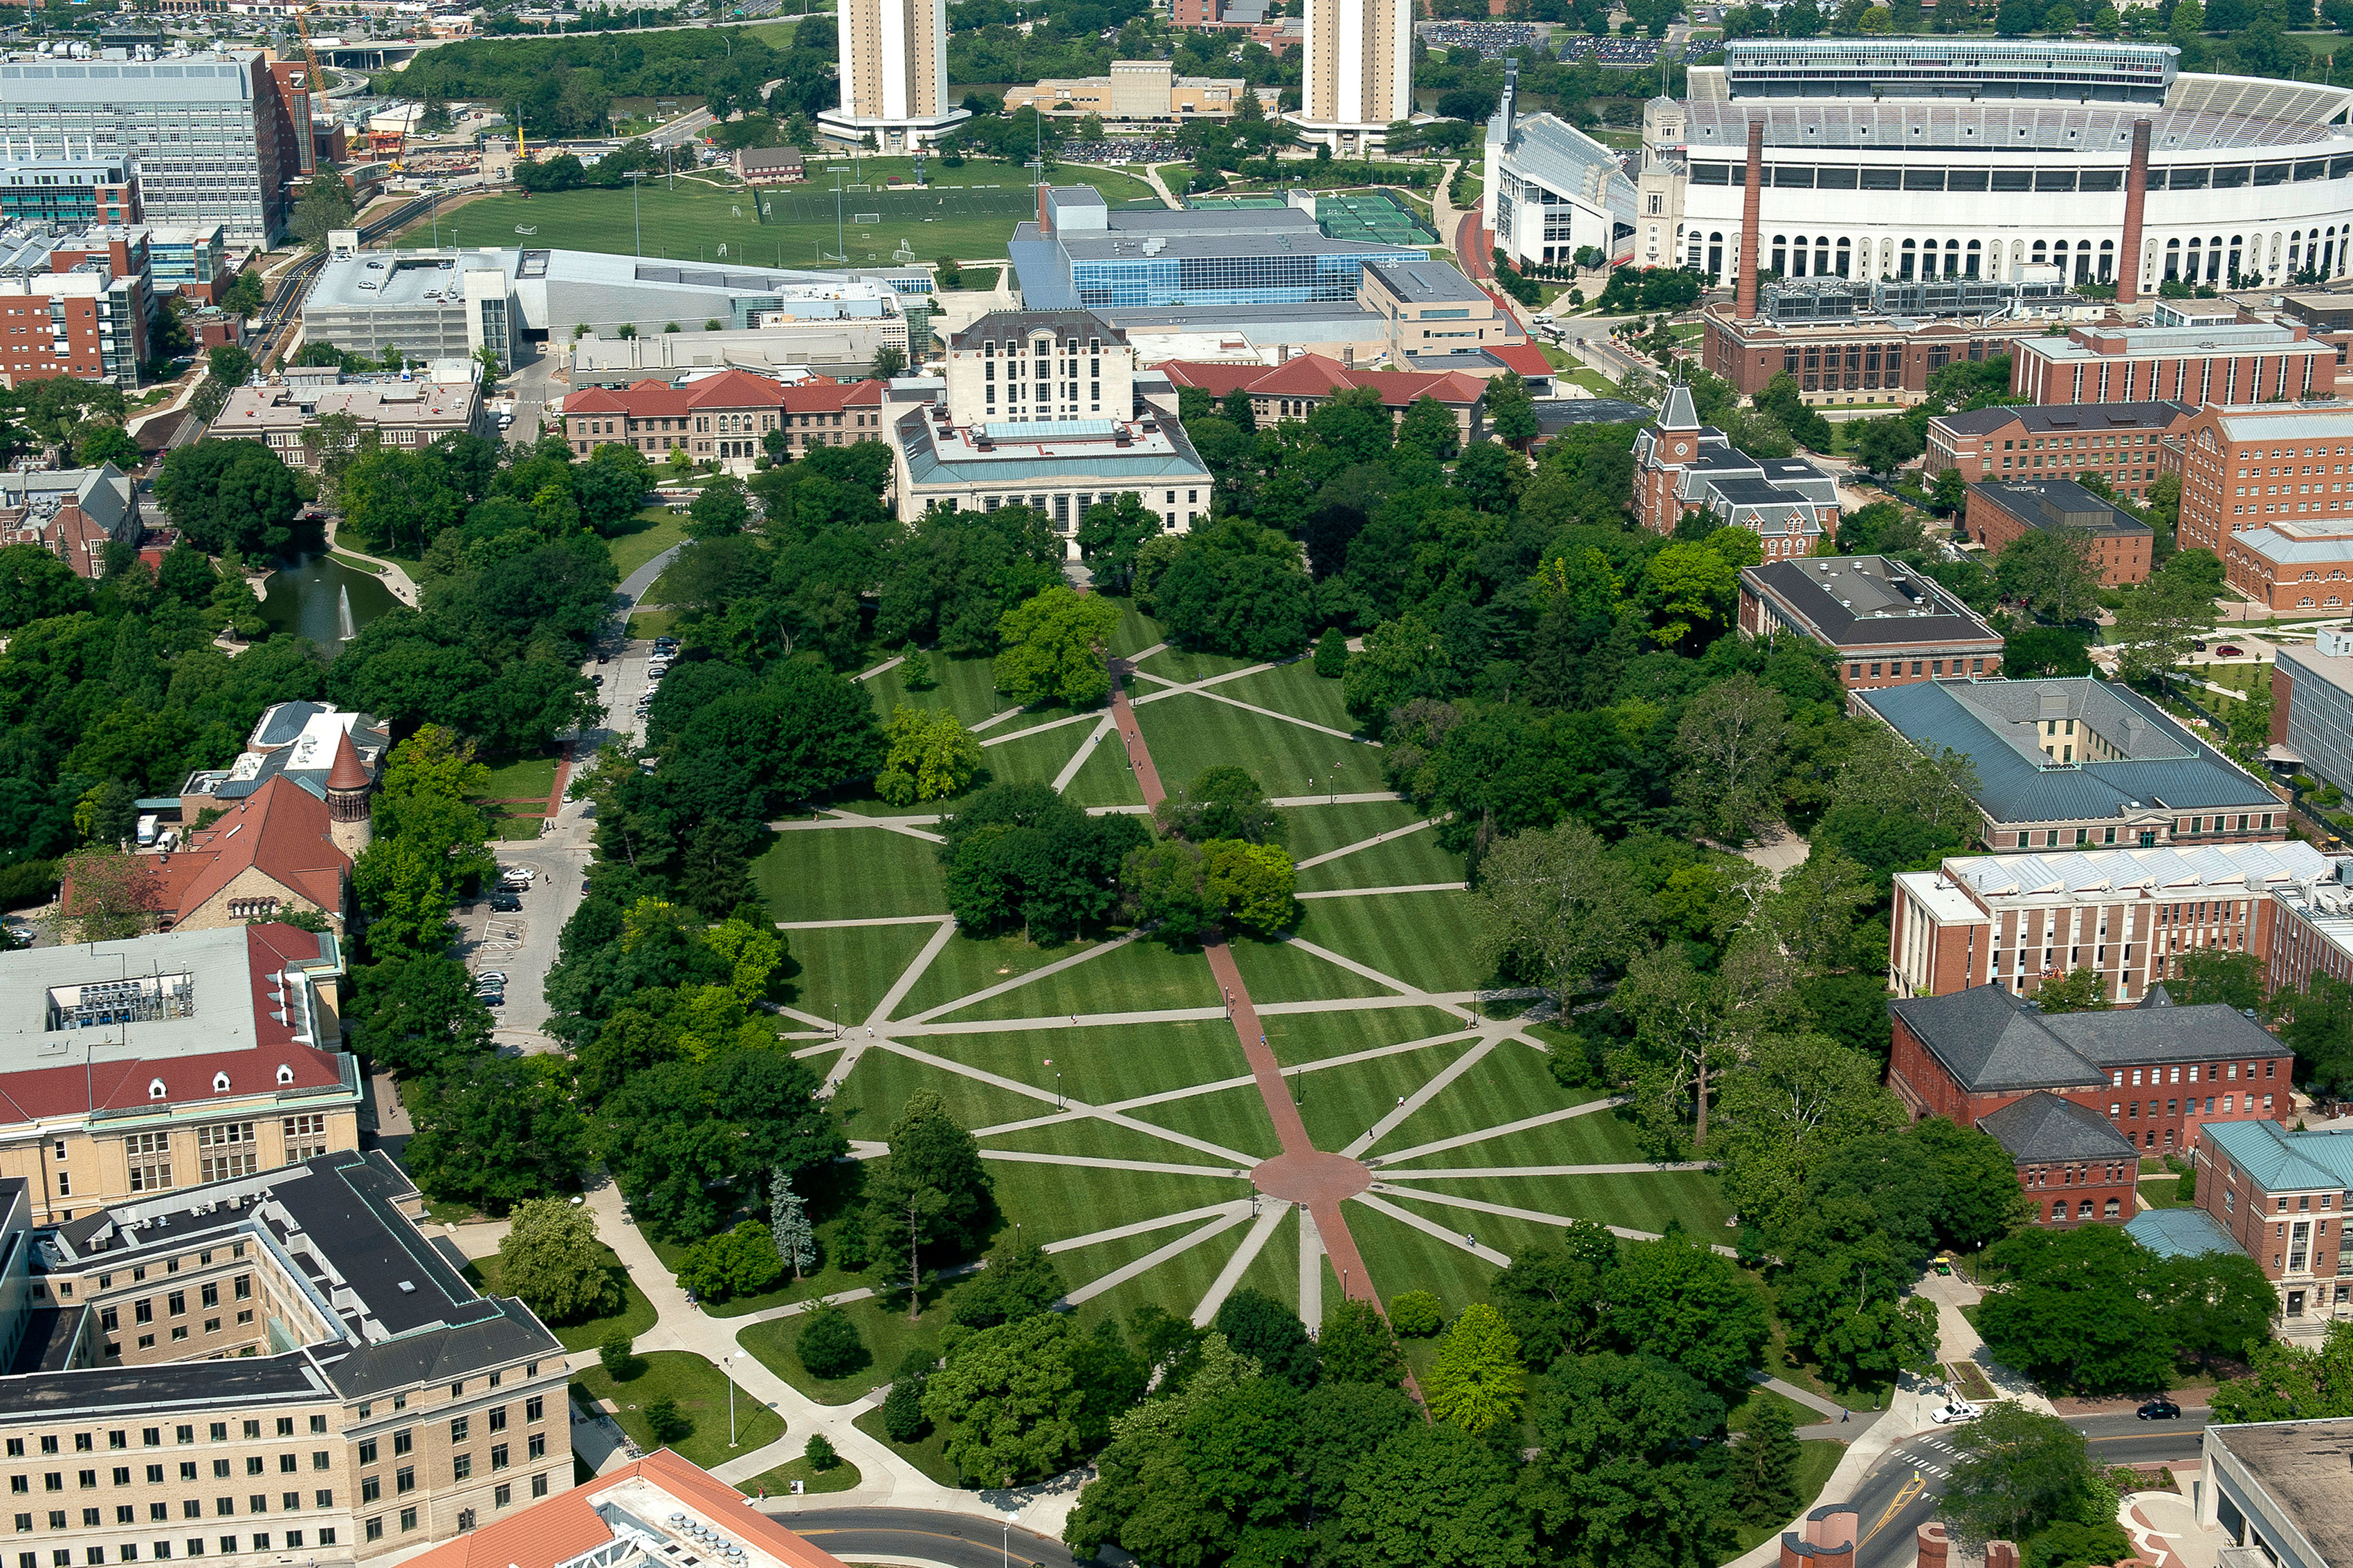 Aerial view of The Ohio State University